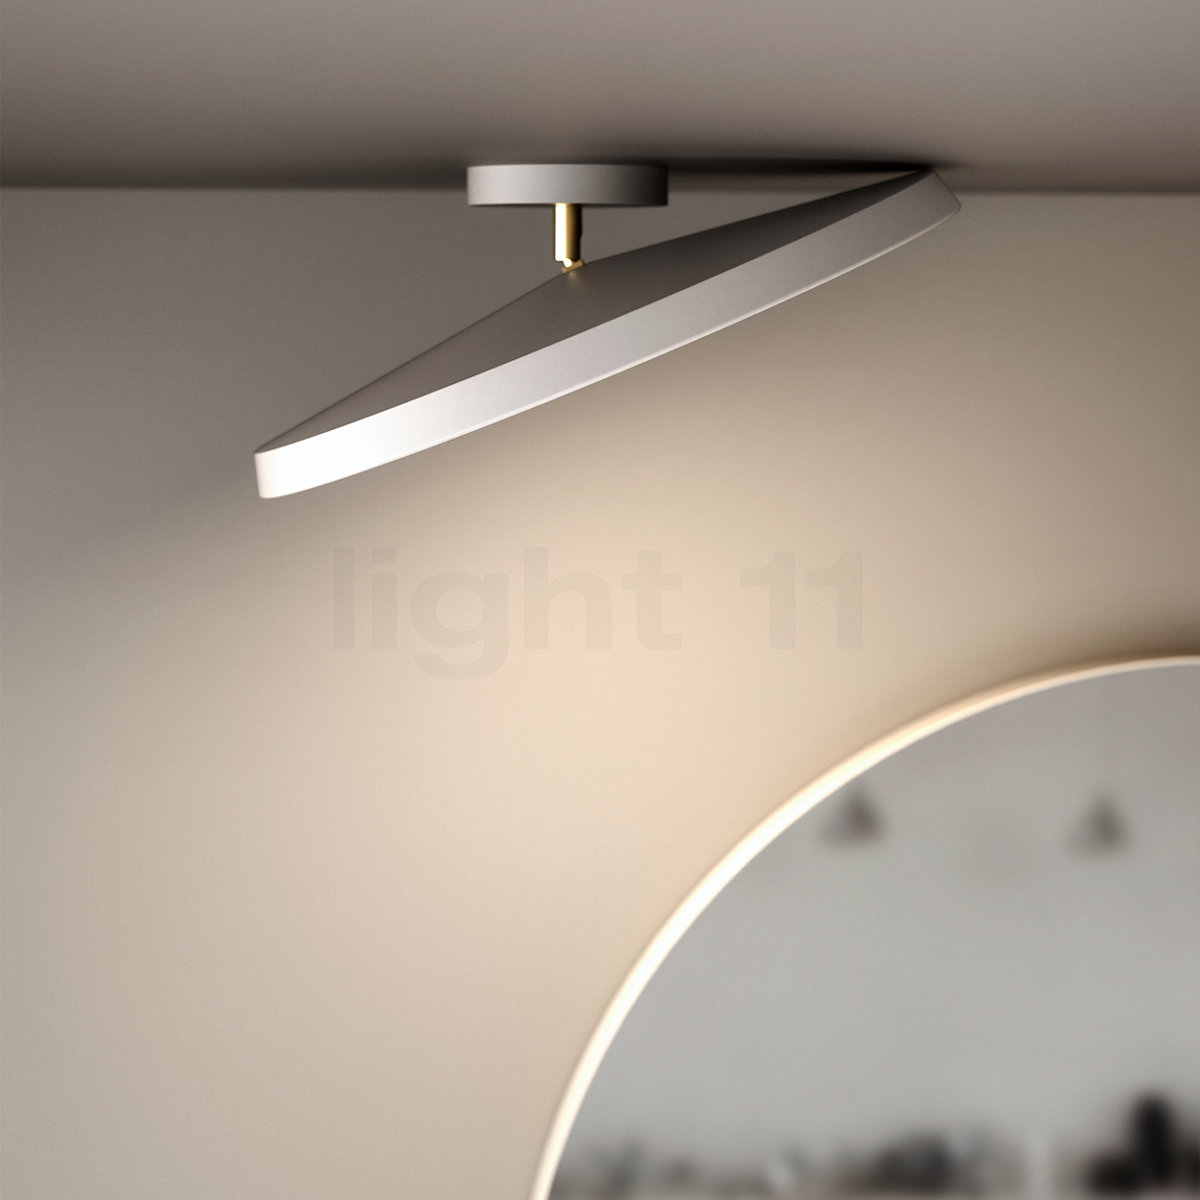 Light the Kaito People Ceiling Buy Design at LED Pro for